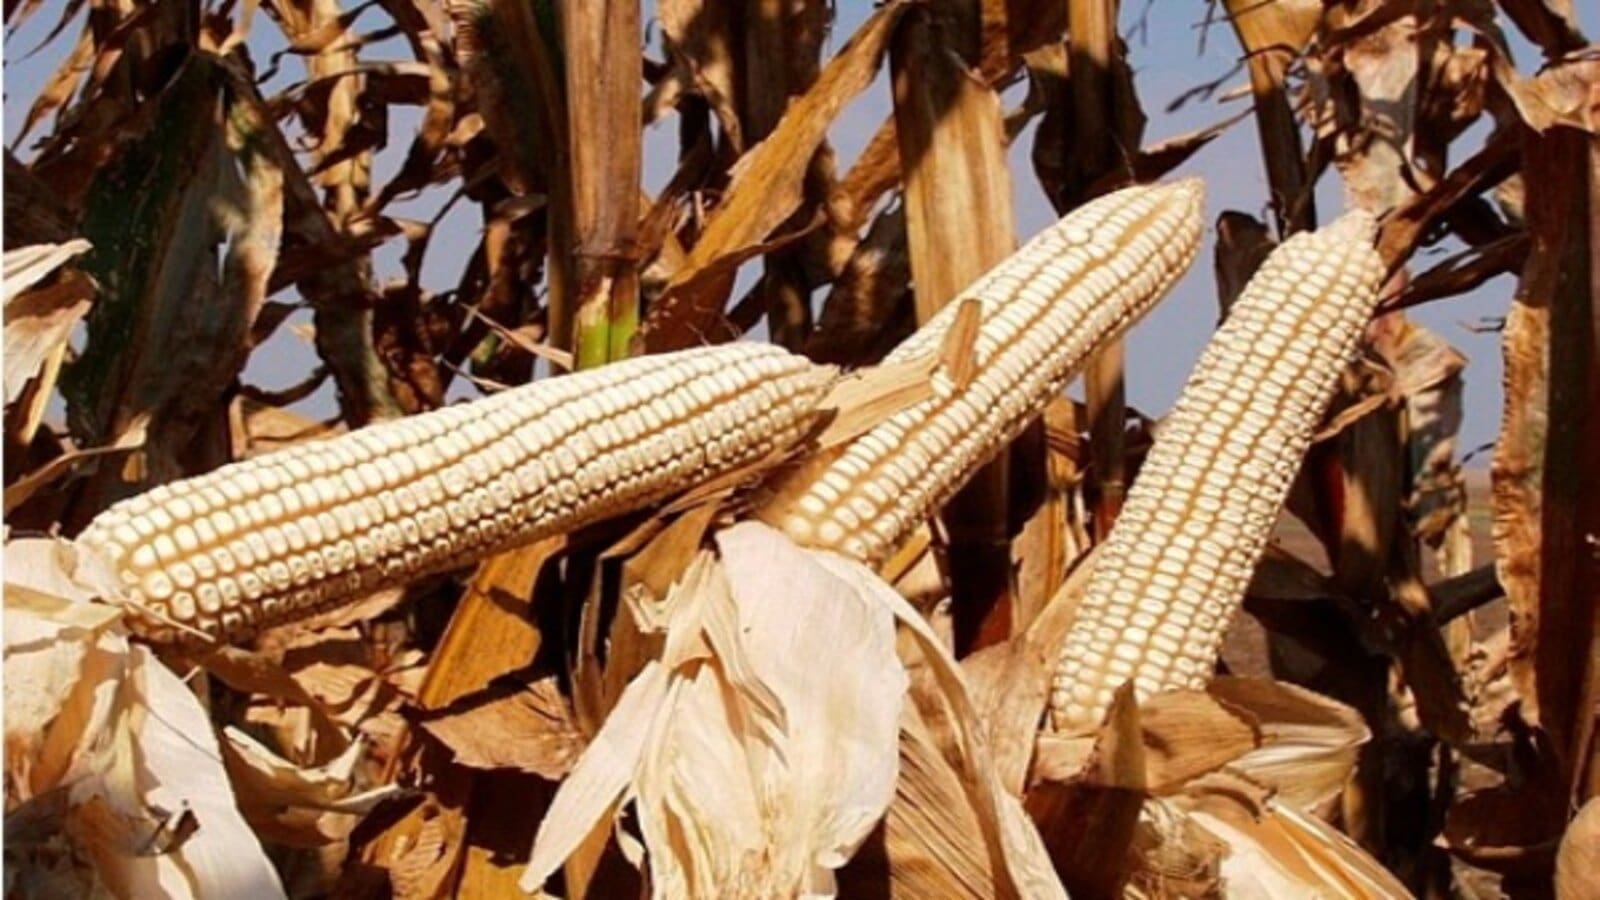 Zimbabwe on course to export maize to East Africa after a bumper harvest